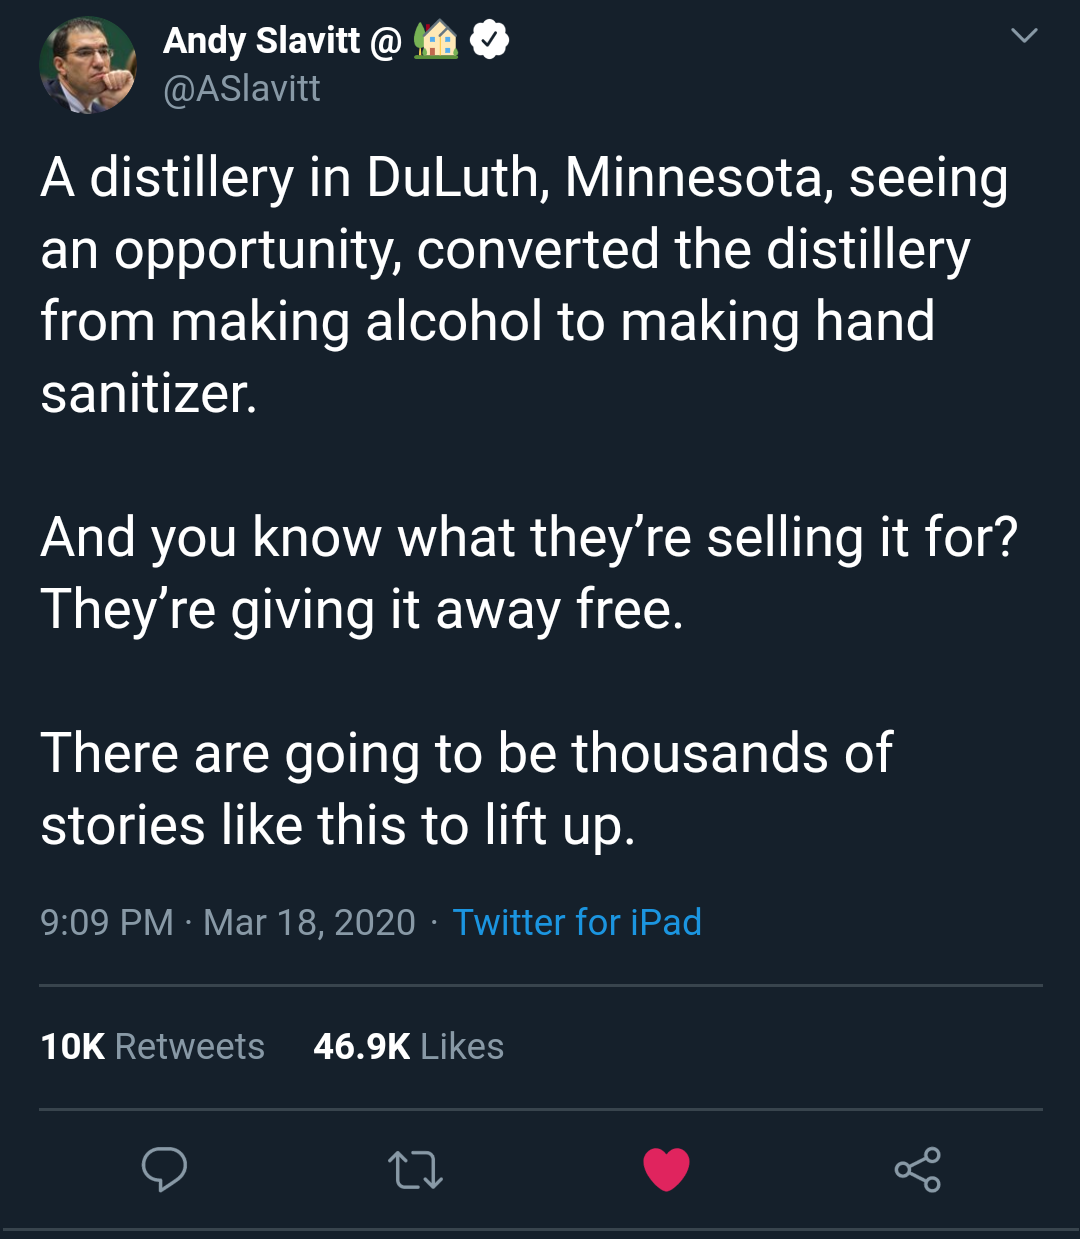 screenshot - Andy Slavitt @ A A distillery in DuLuth, Minnesota, seeing an opportunity, converted the distillery from making alcohol to making hand sanitizer. And you know what they're selling it for? They're giving it away free. There are going to be tho